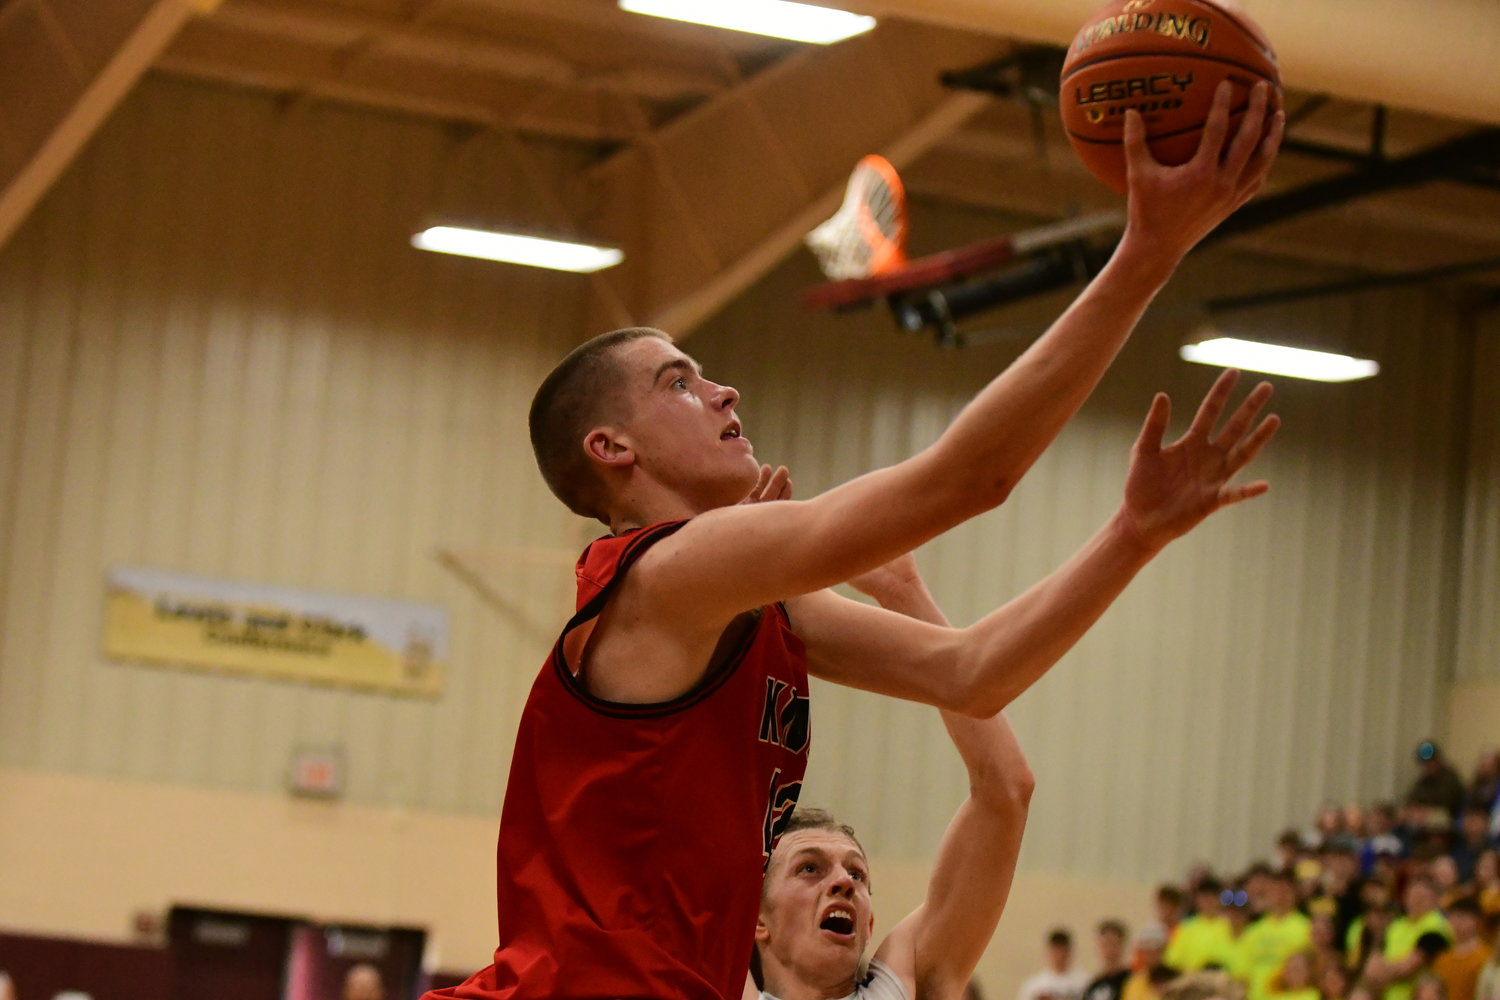 Photos from Saturday’s Class 2 District 6 boys title game between Putnam County and Knox County.